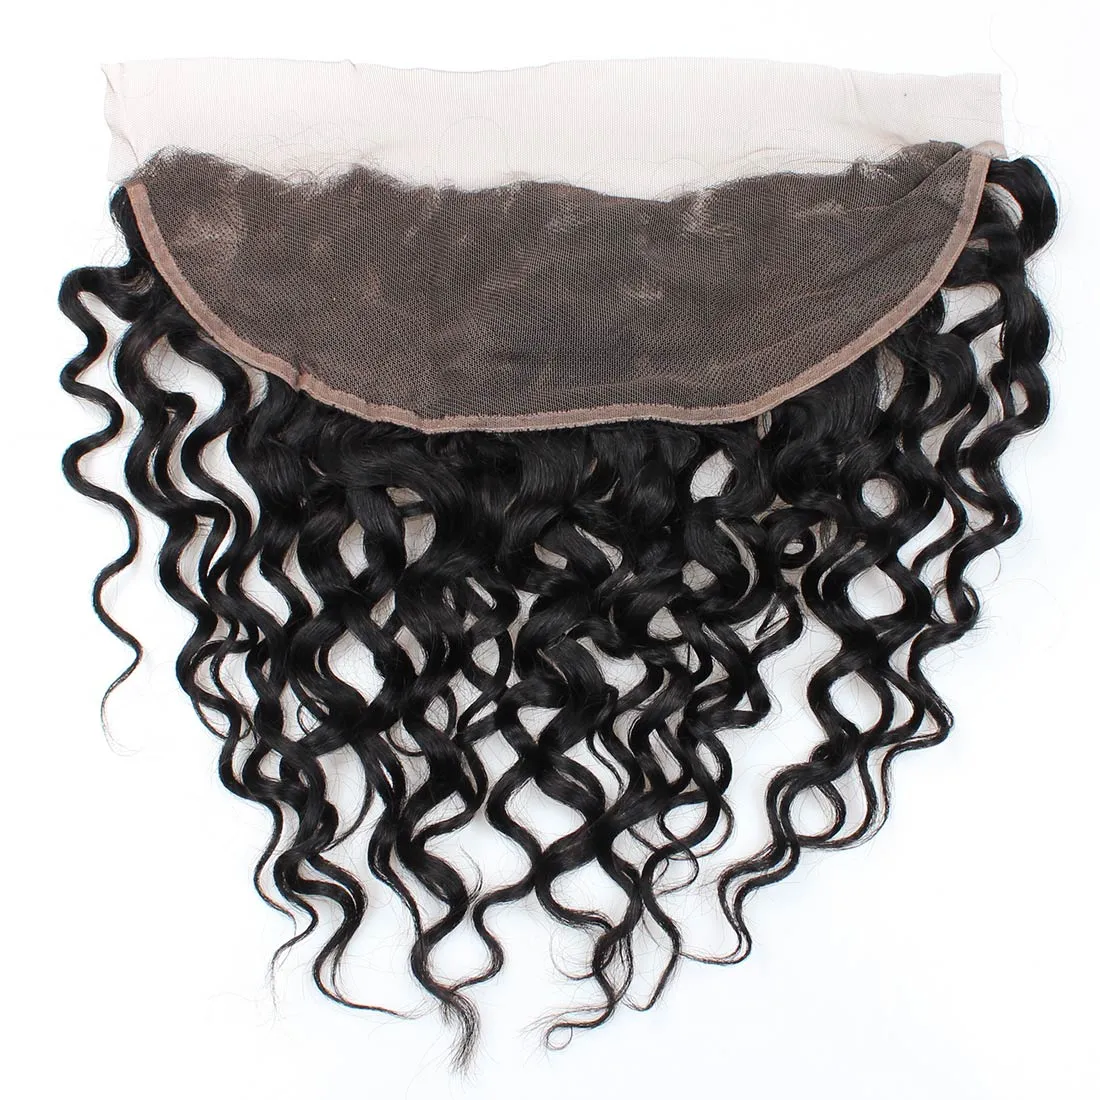 Whole Cheap 8A Brazilian Straight Hair Body Loose Water Deep Curly Wave Ear to Ear 1325 Lace Frontal Part 820inch 5974322